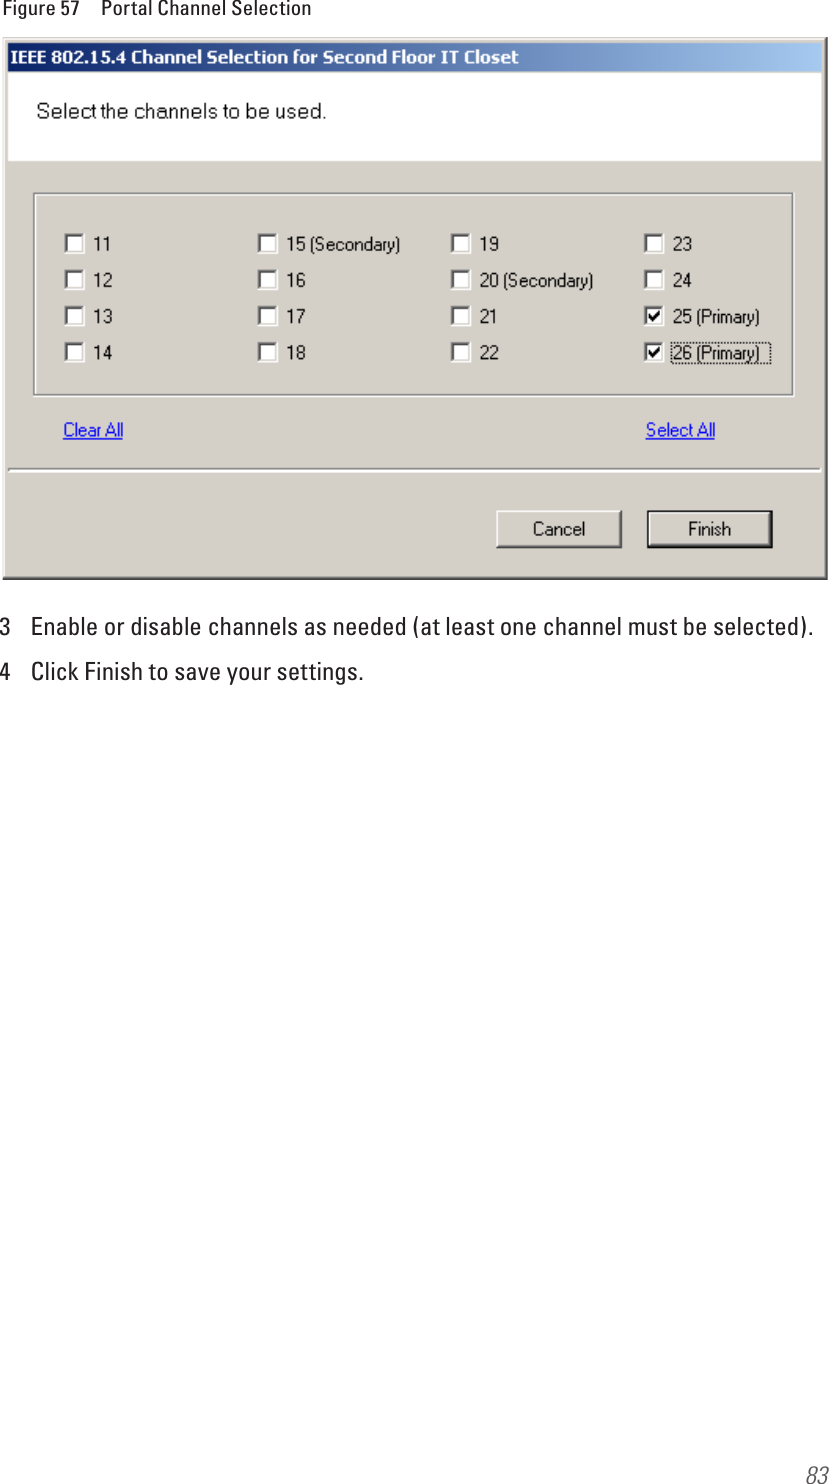 83Figure 57  Portal Channel Selection3  Enable or disable channels as needed (at least one channel must be selected).4  Click Finish to save your settings.